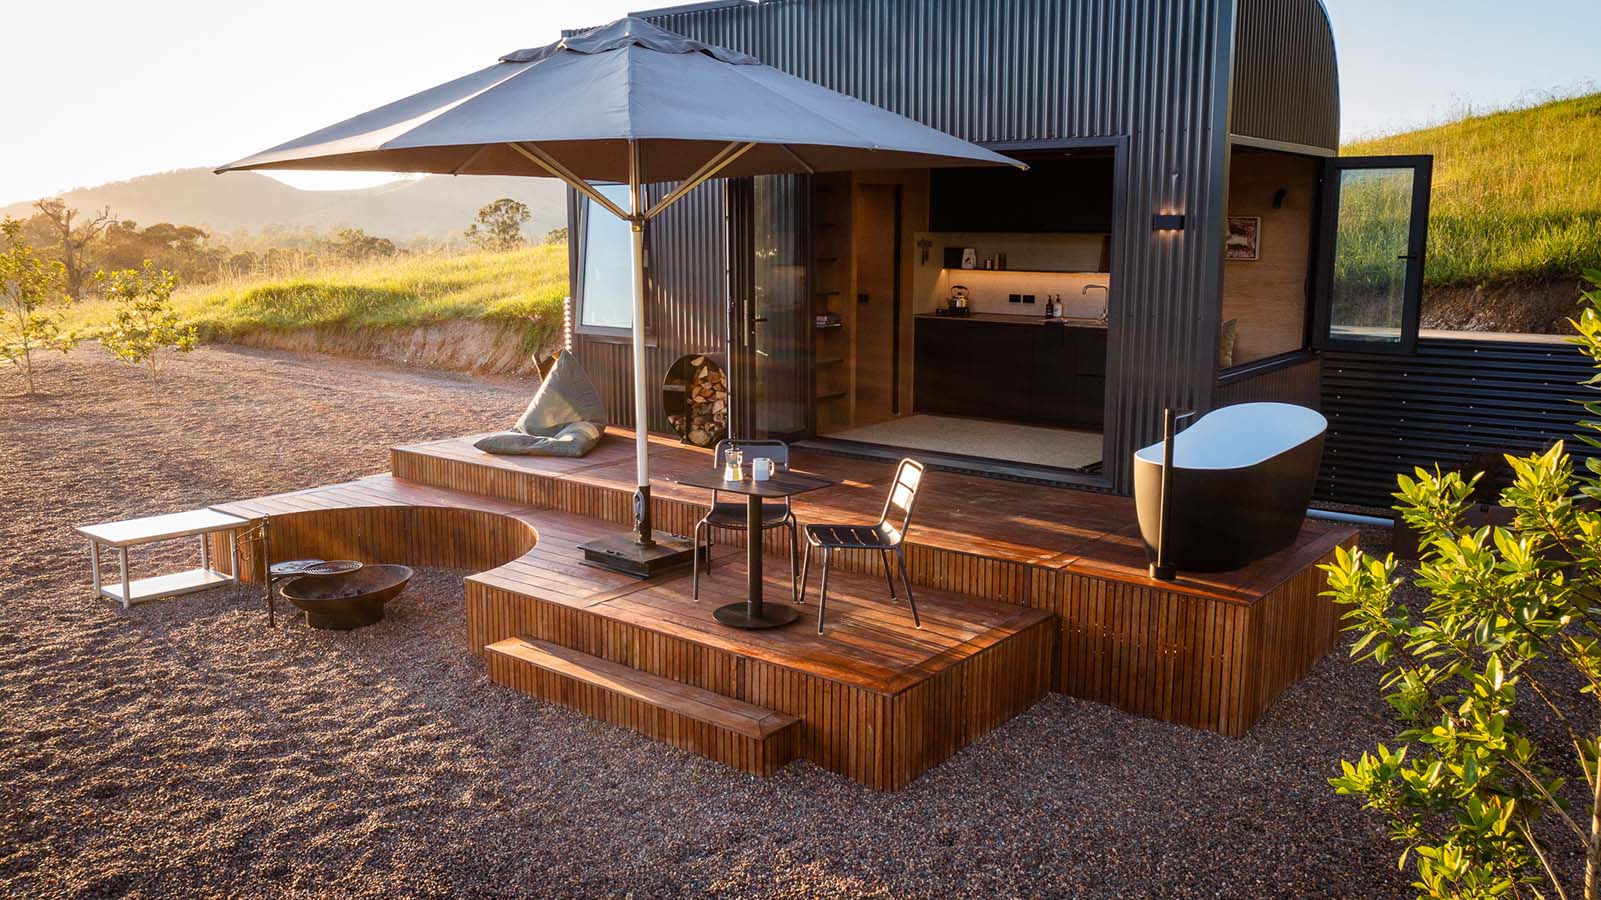 Black Sprout chairs and table overlooking green Australian hilly landscapes.